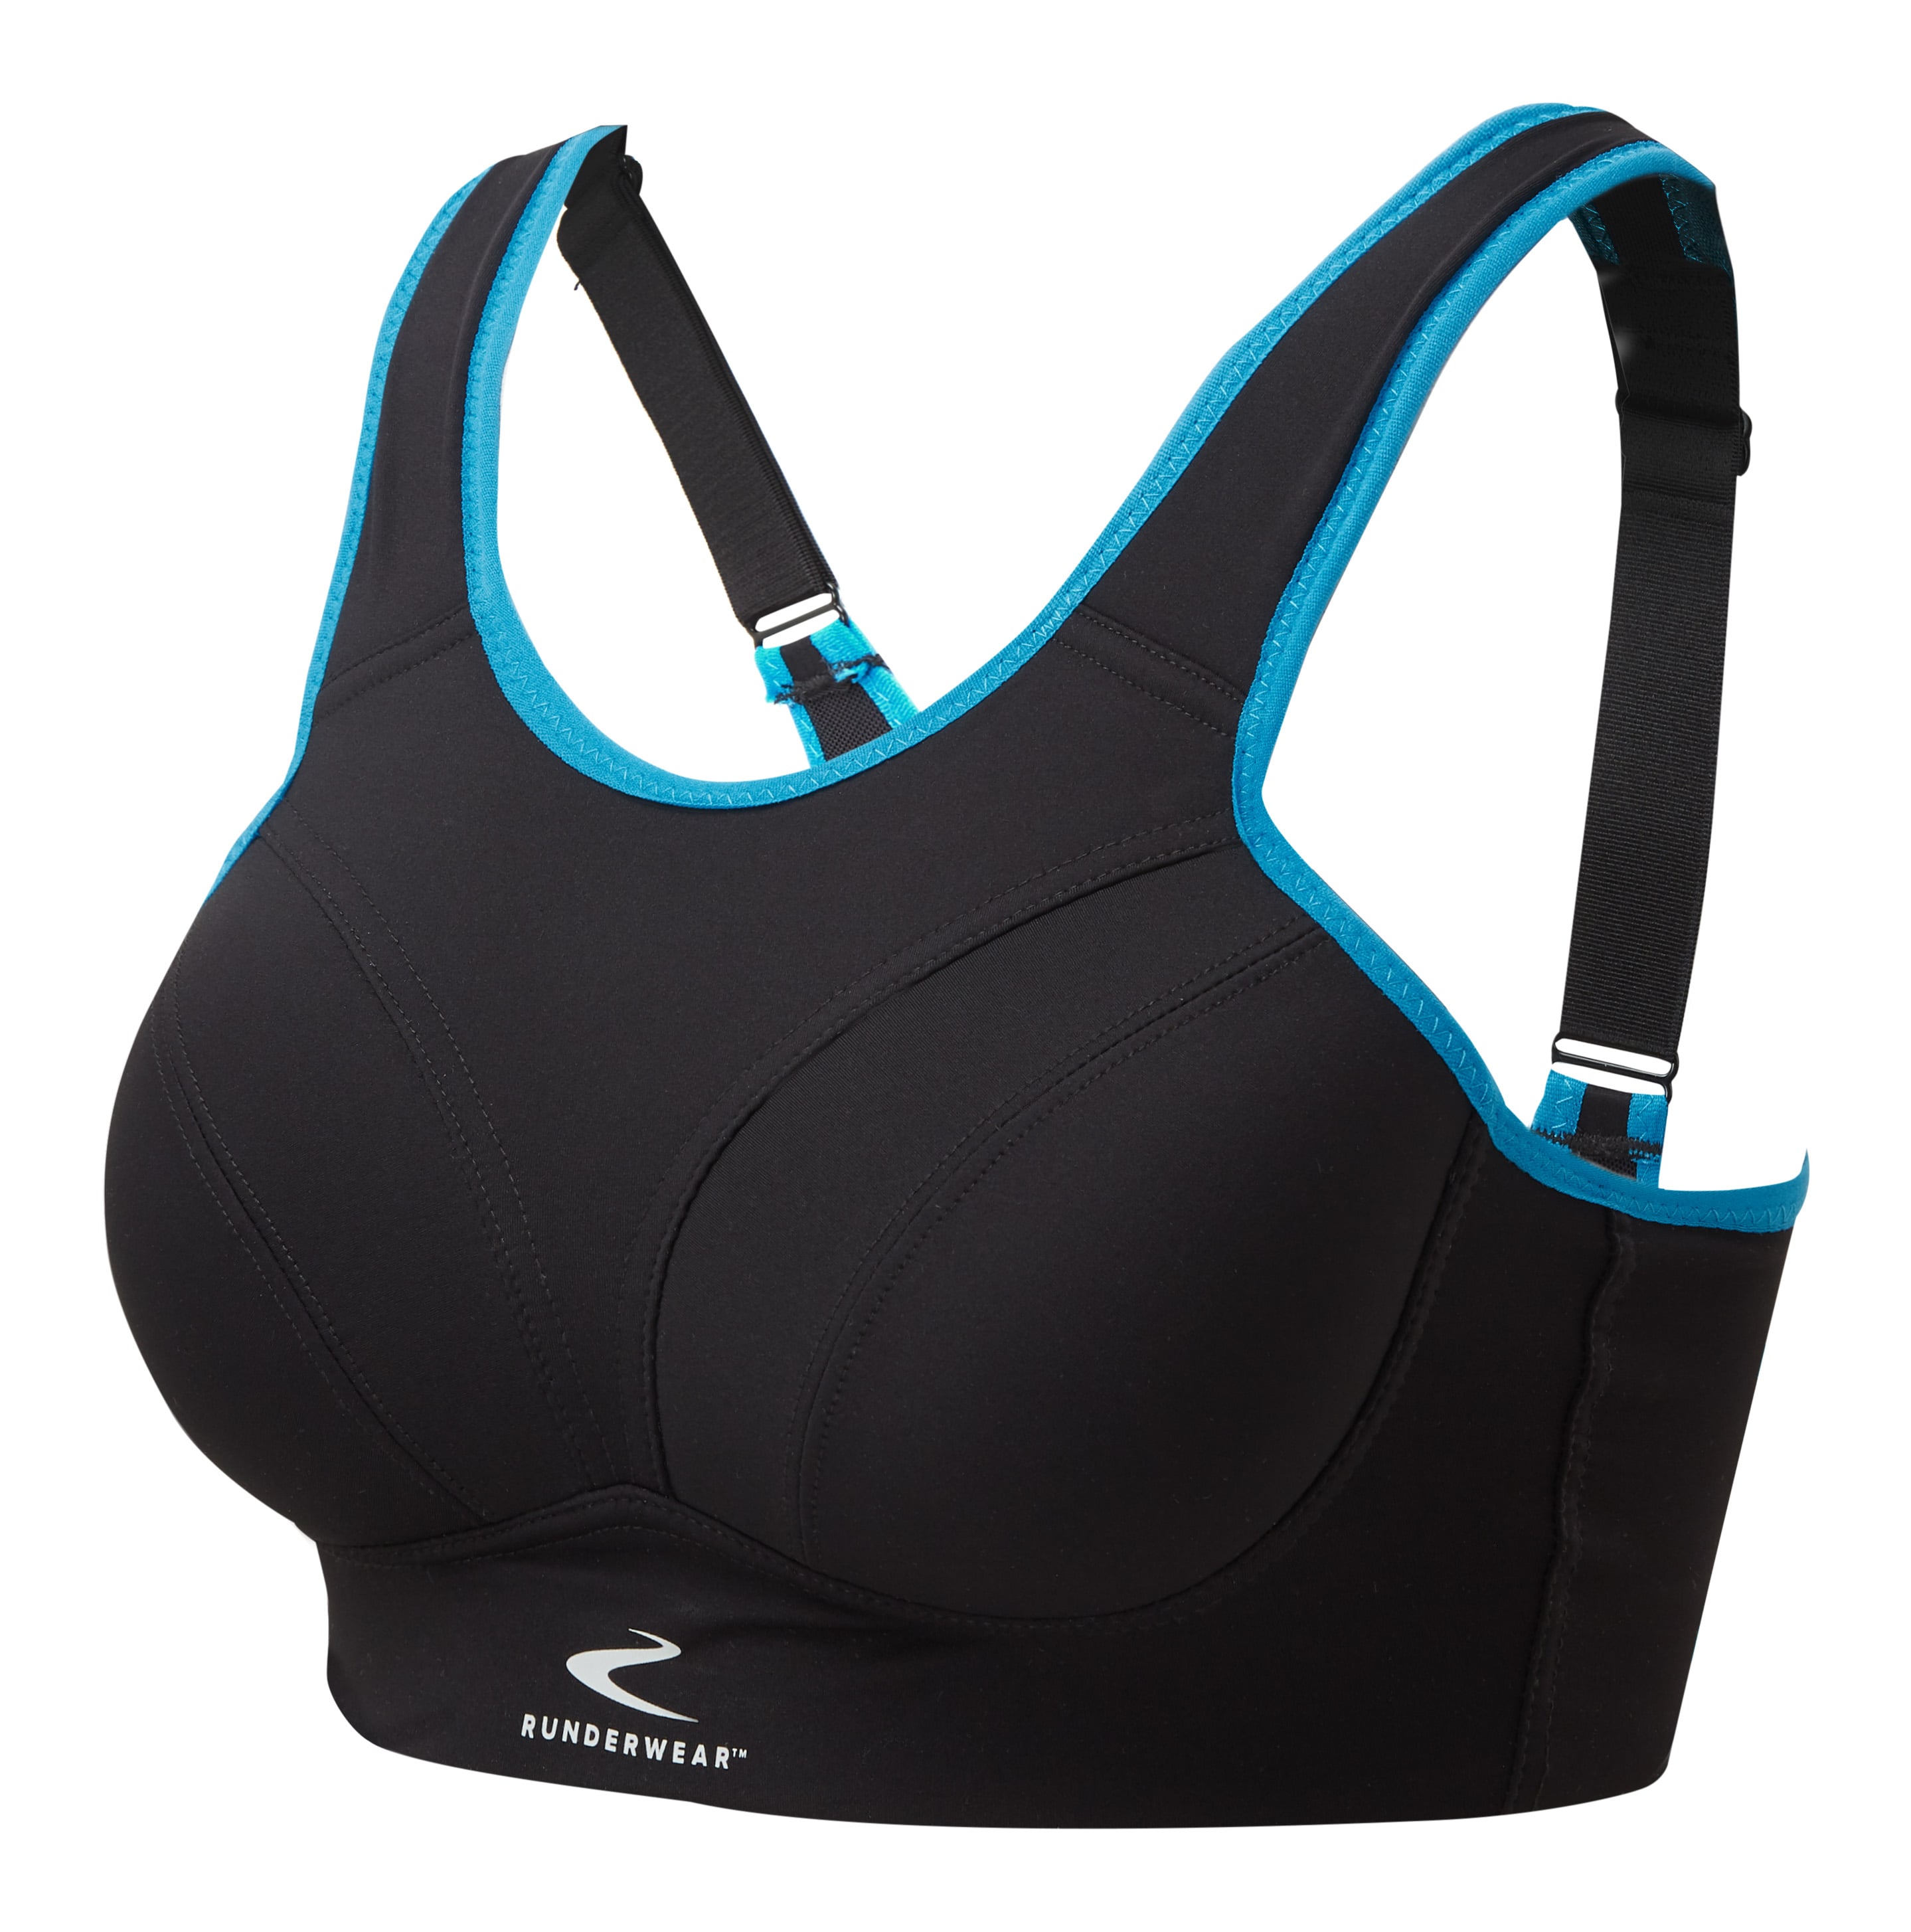 Beat the 'Bounce' with a proper Sports Bra